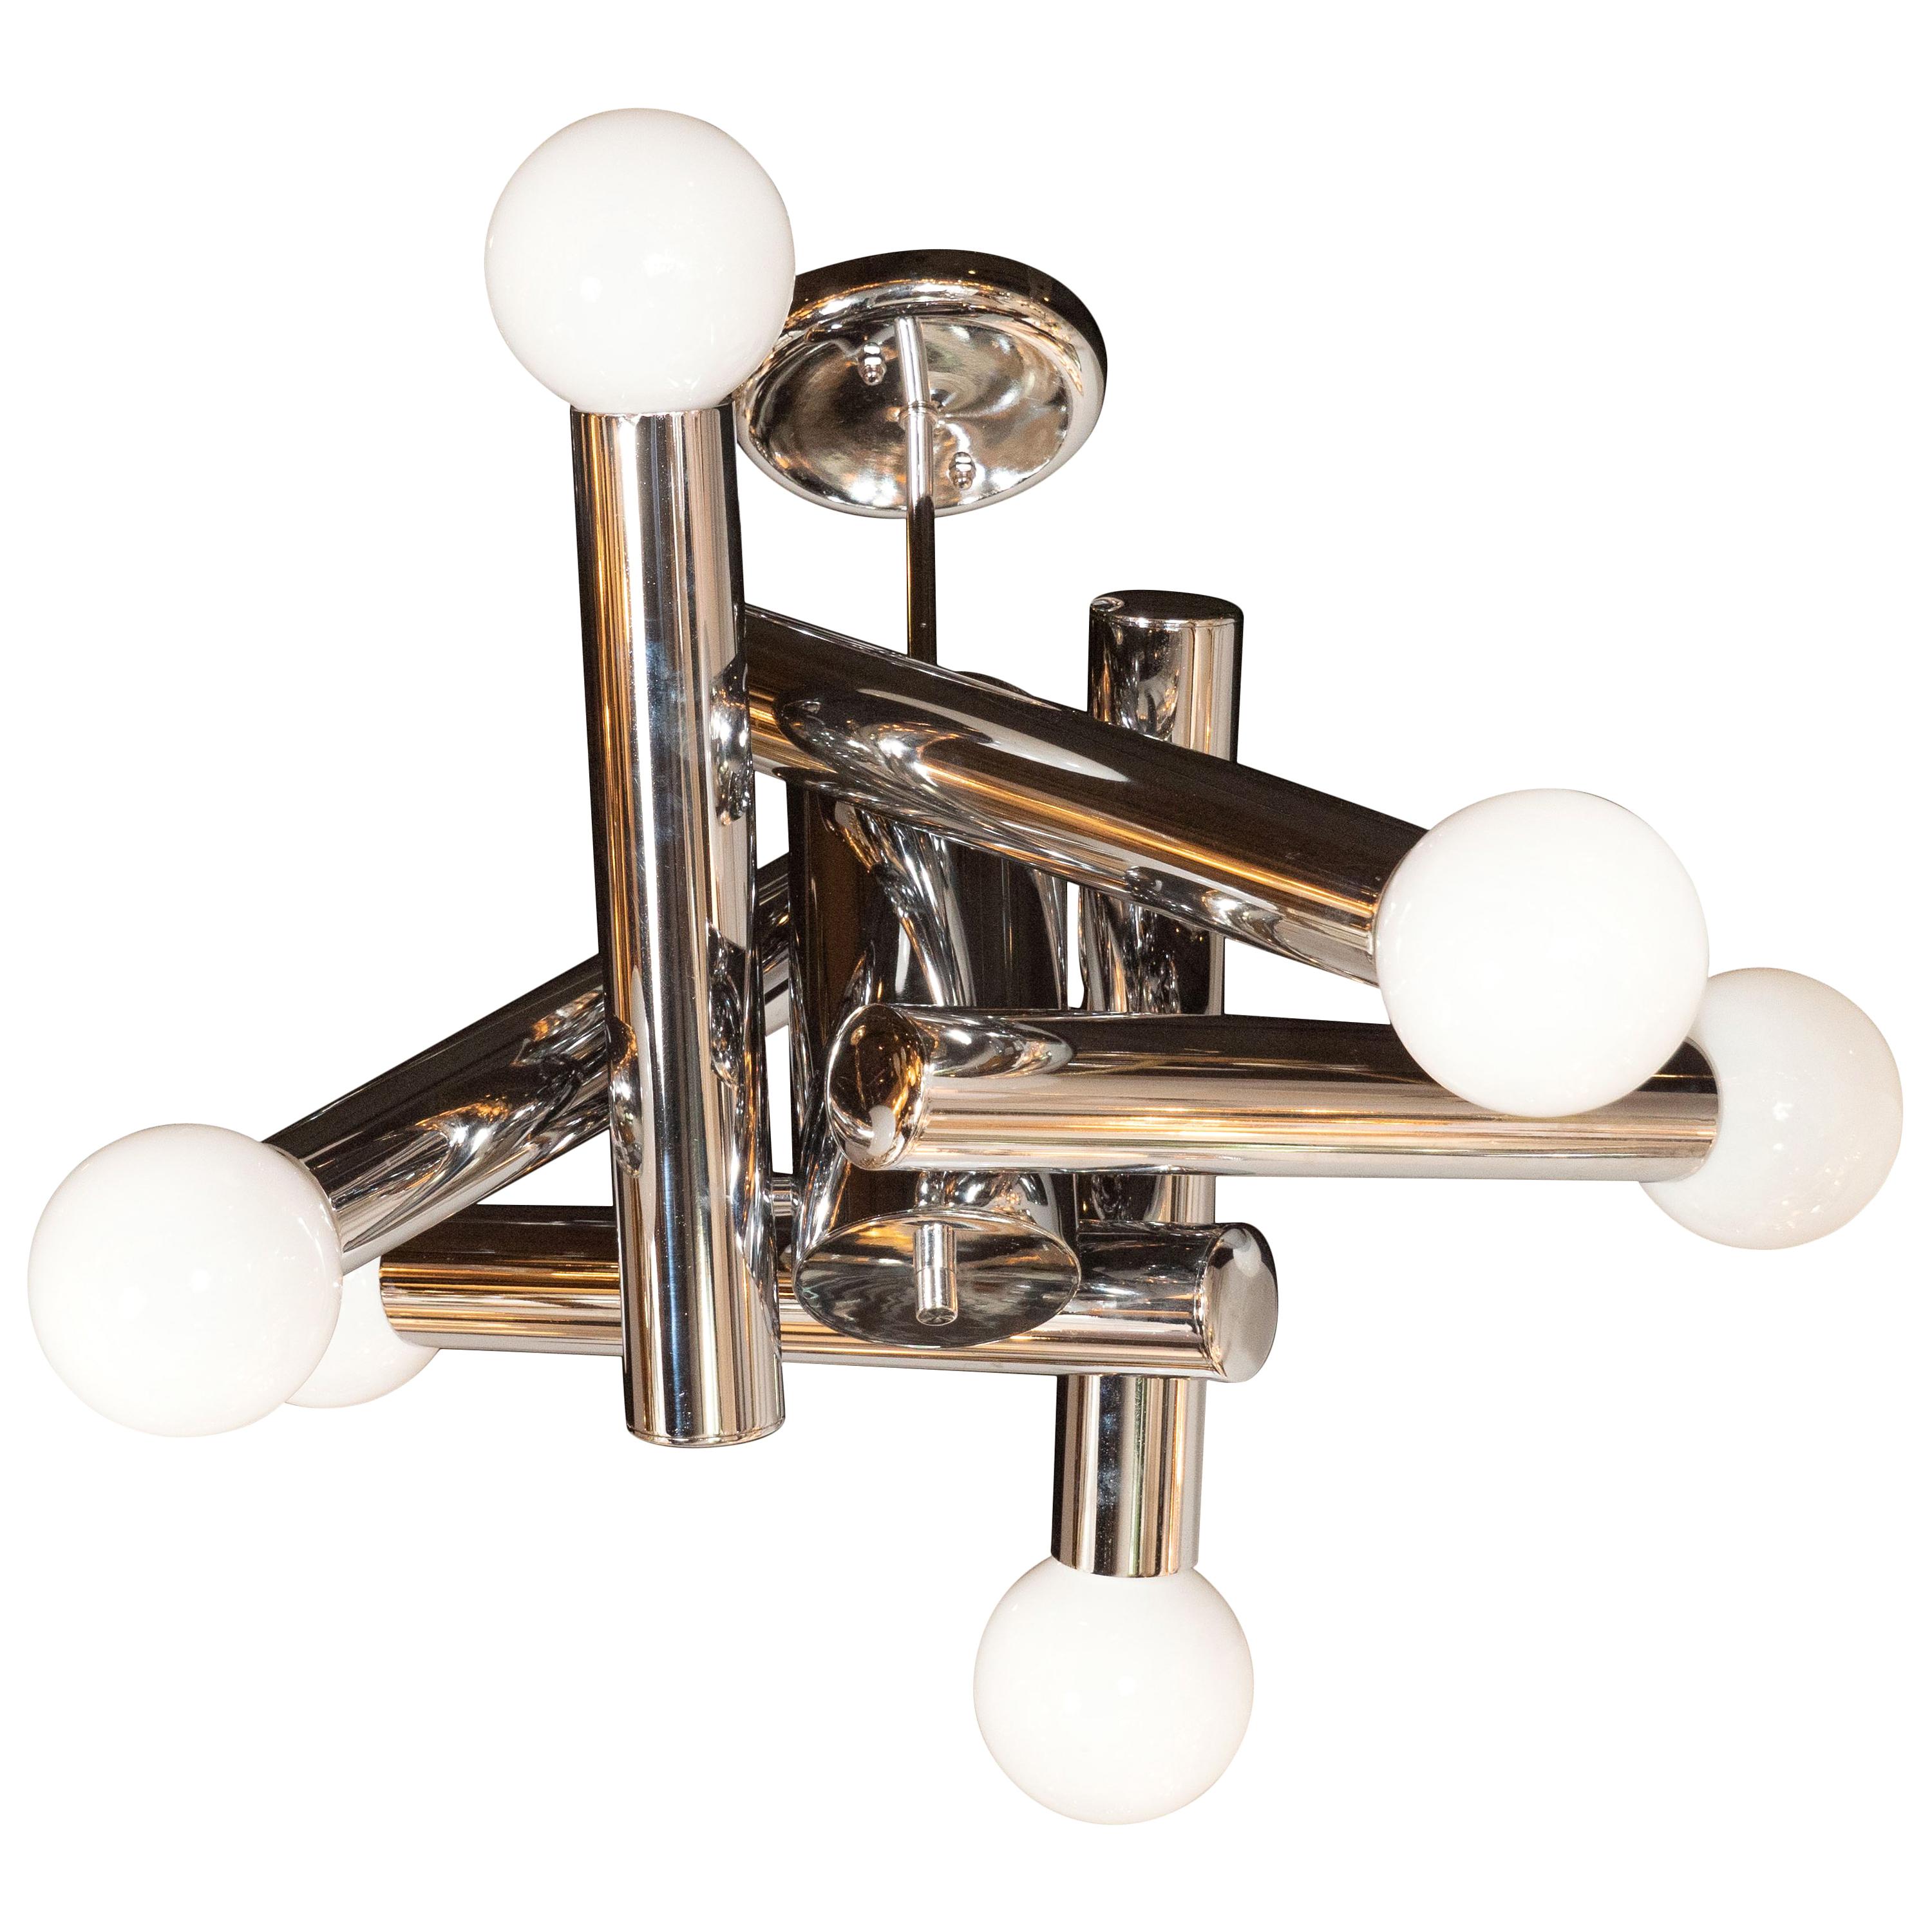 Midcentury Modern Sculptural Chandelier in Chrome and Frosted Glass by Sciolari